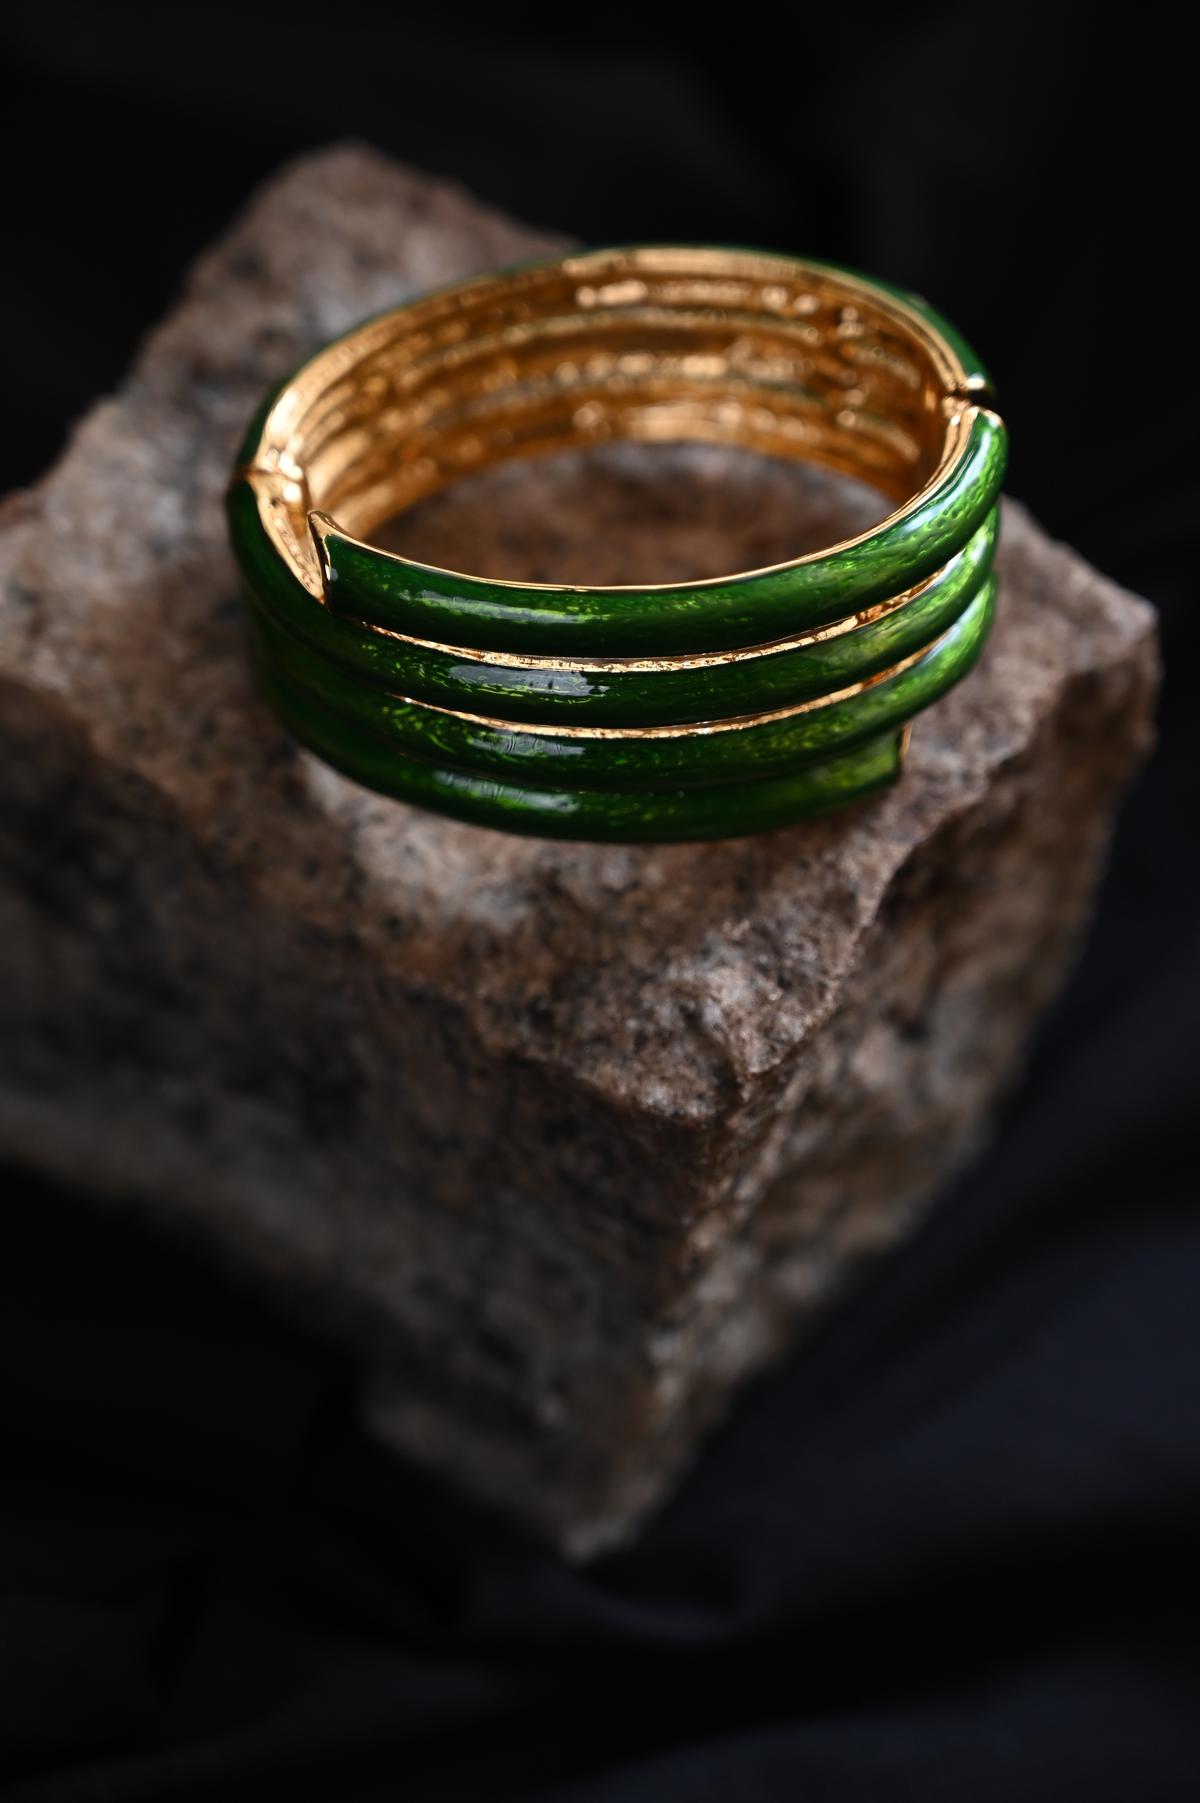 An emerald-green bracelet, which was part of the Nefertiti exhibition, from the Metropolitan Museum of Art in New York.